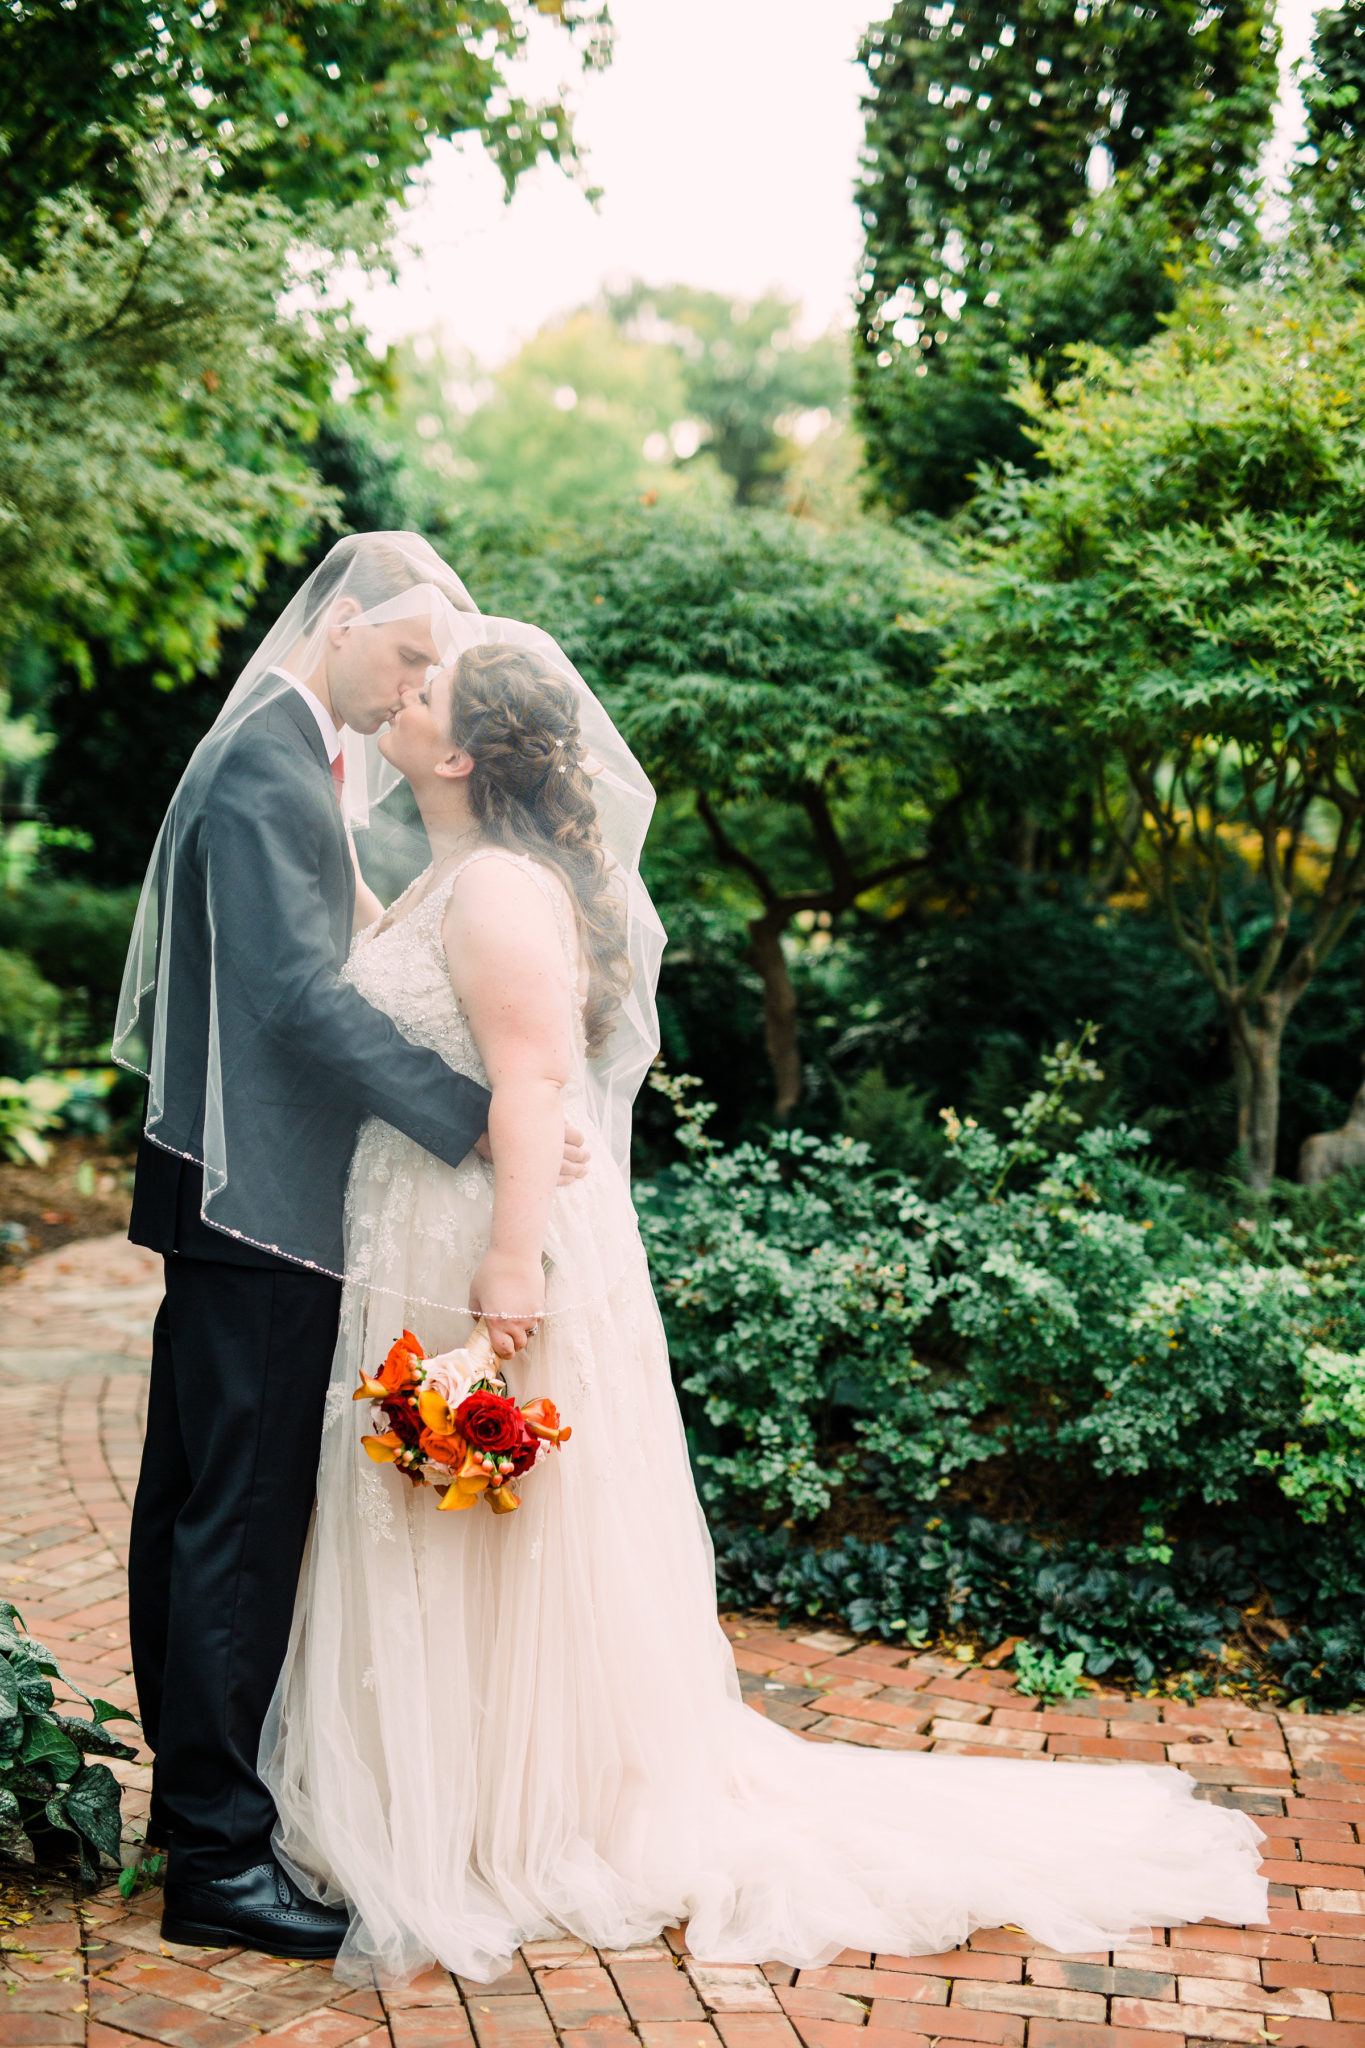 REAL WEDDING | Fall Missouri Wedding at The Conservatory | Zoe Life Photography | Pretty Pear Bride